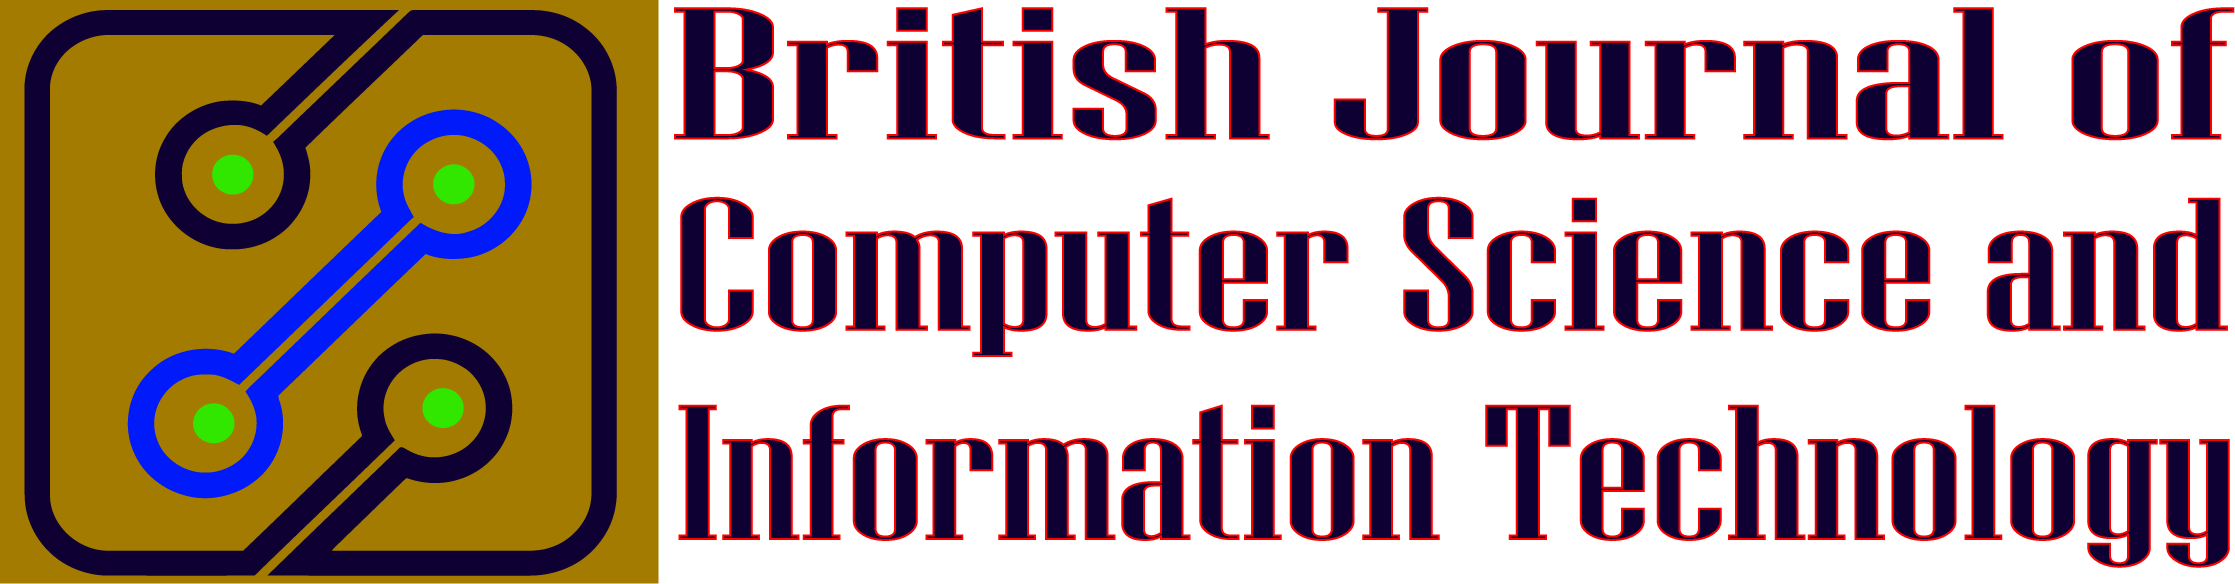 British Journal of Computer Science and Information Technology (BJCSIT)